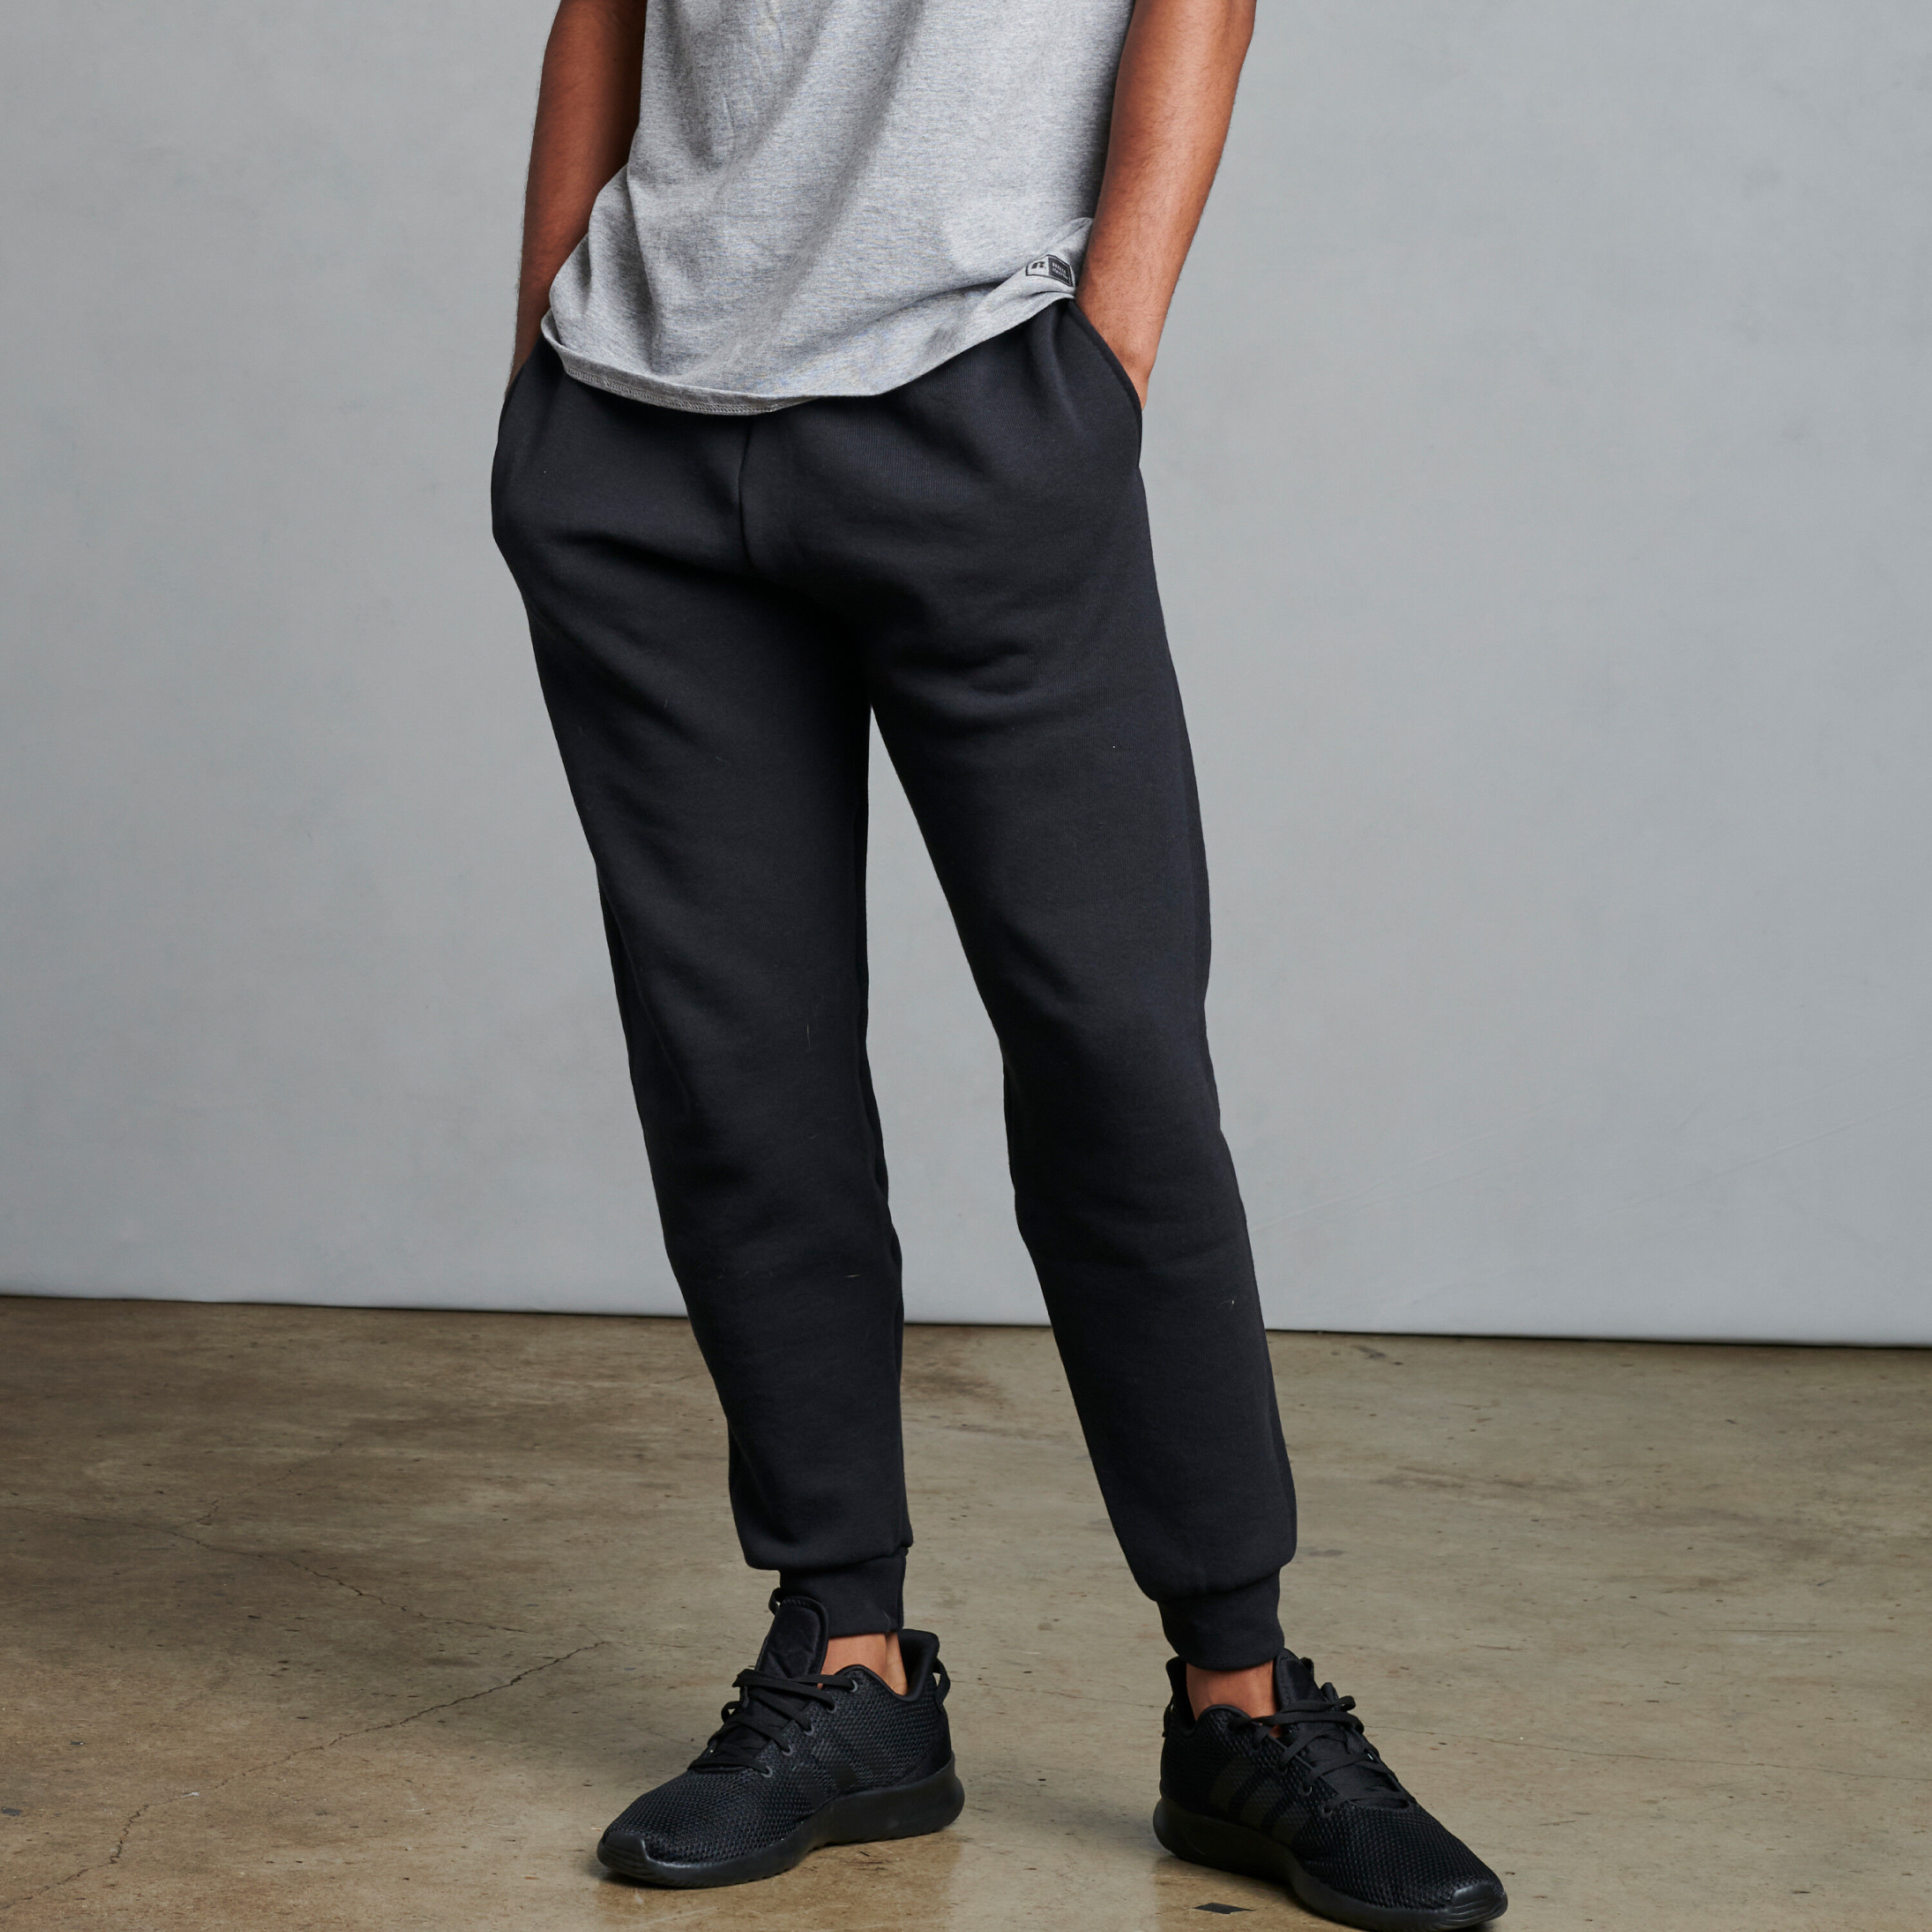 russell athletic slim fit pants